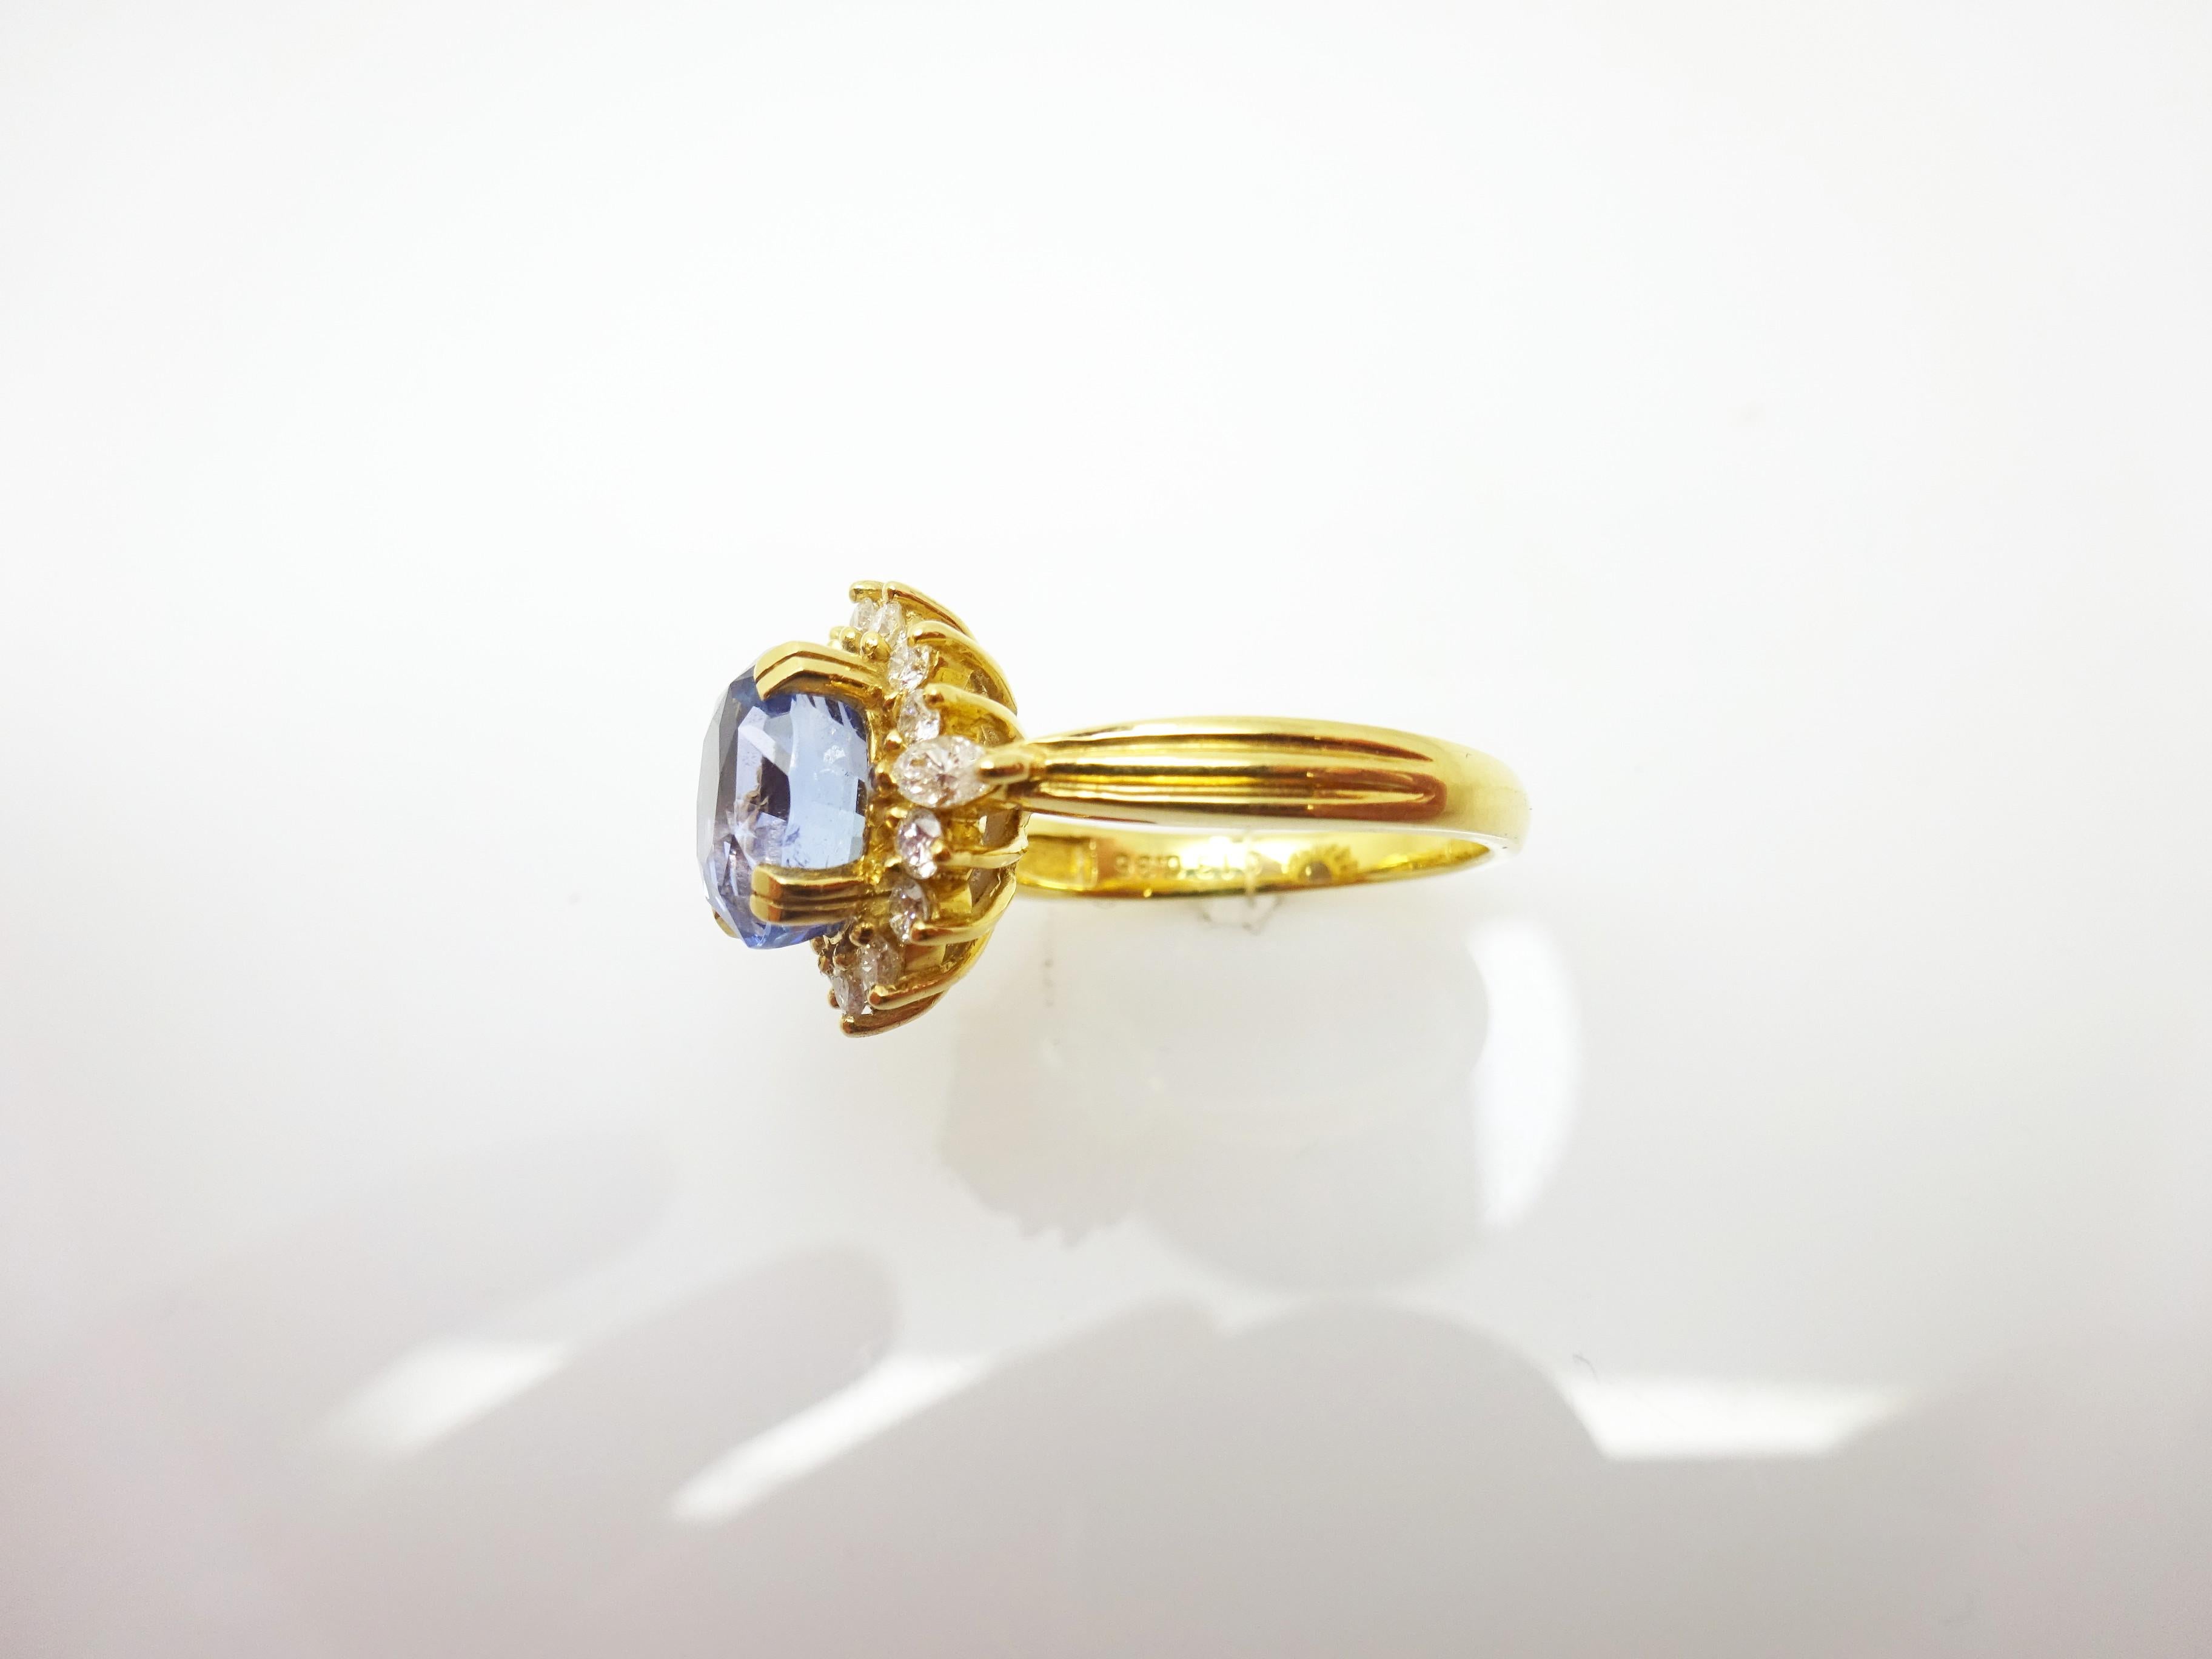 Brilliant Cut 18k Gold 4.34cts Genuine Natural Ceylon Sapphire and Diamond Ring '#J3398' For Sale